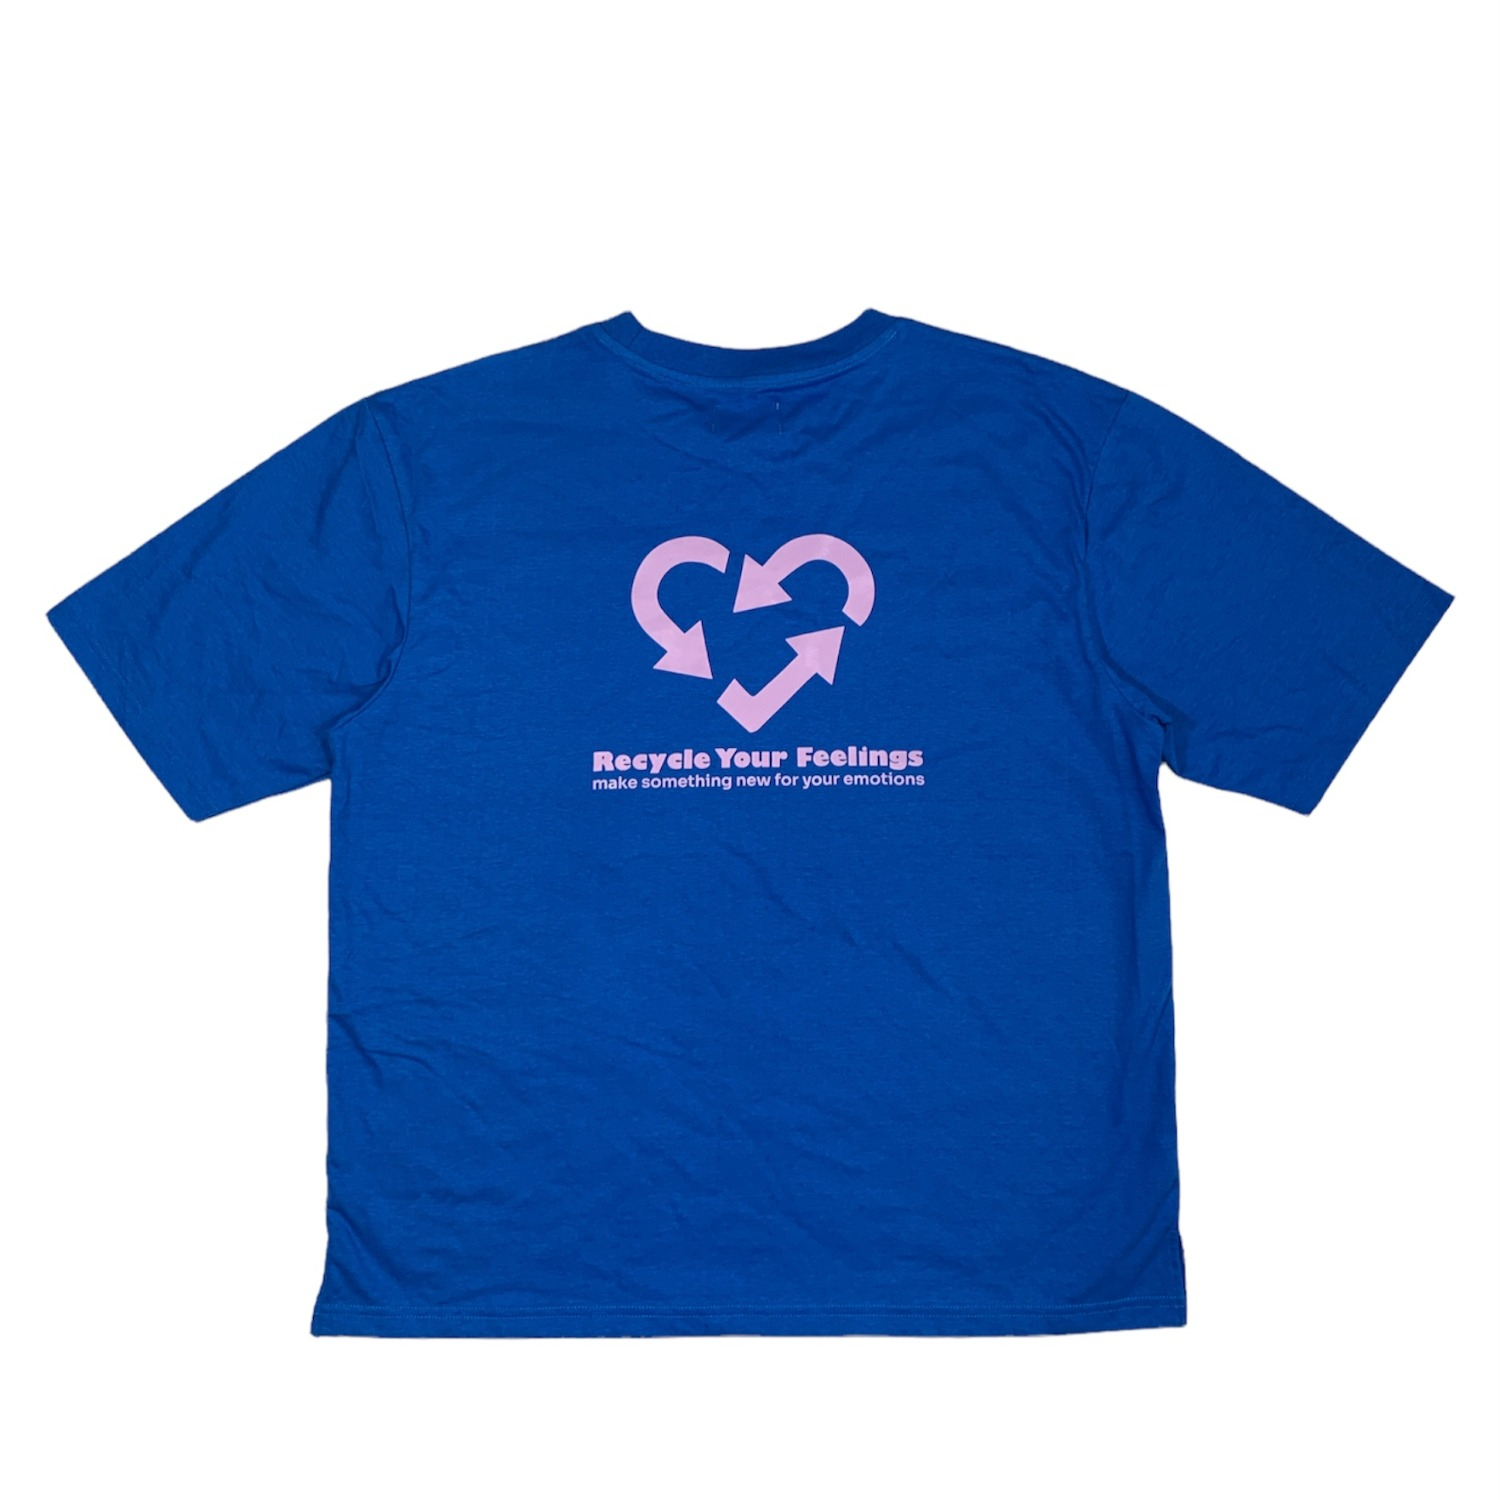 Recycle Your Feelings Tee (Blue)